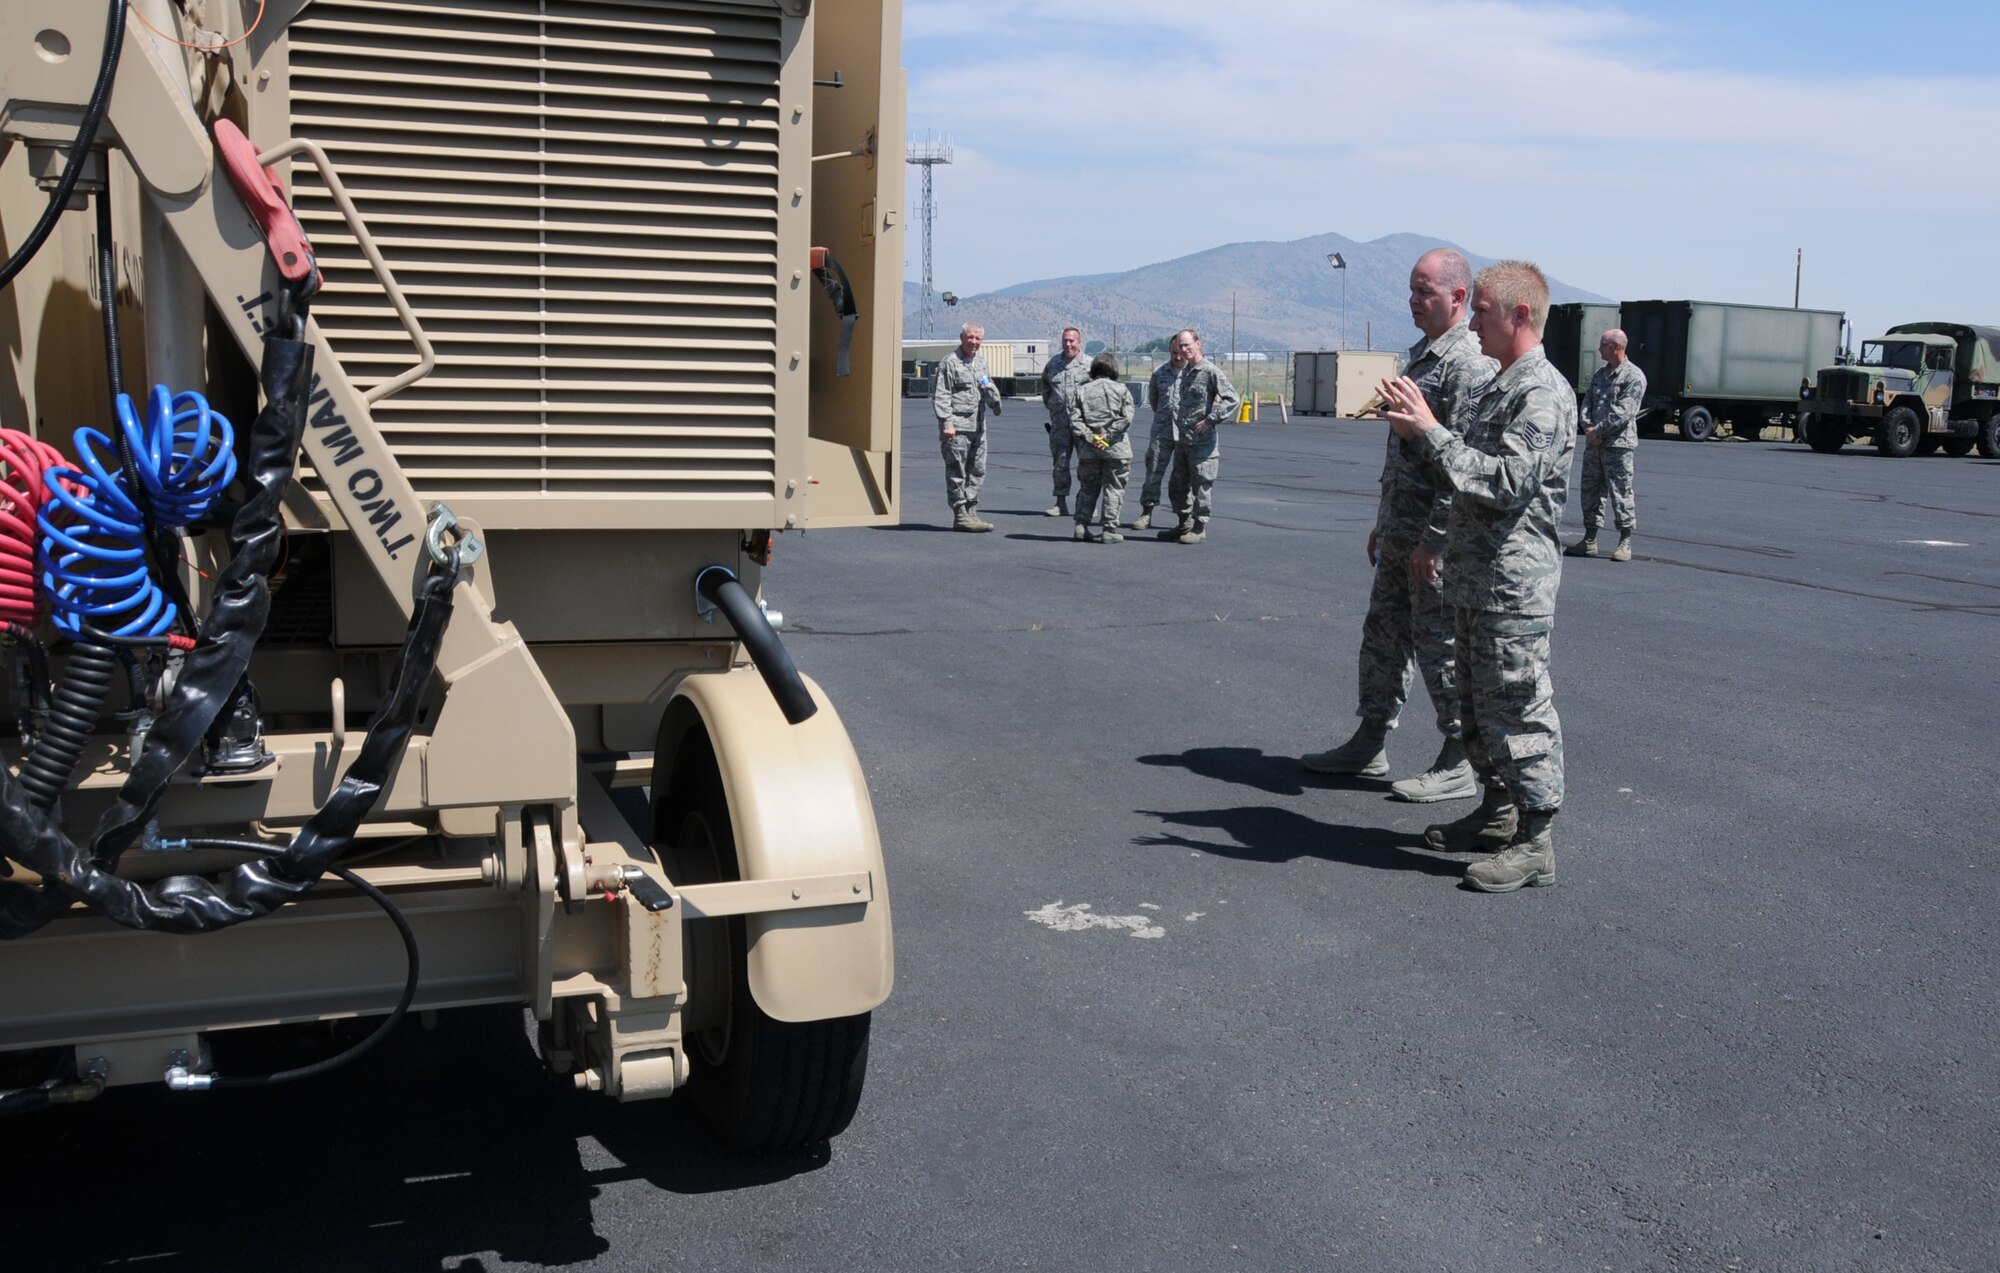 U.S. Air Force Staff Sgt. Mark Chinander, 270th Air Traffic Control Squadron, shows the Air National Guard Command Chief, James W. Hotaling, a new mobile Tactical Air Navigation system during Hotaling's visit to Kingsley Field, Klamath Falls, Ore. July 15, 2014. Hotaling spent the day meeting and speaking with the Airmen of the 173rd FW and 270th Air Traffic Control Squadron. (U.S. Air National Guard photo by Master Sgt. Jennifer Shirar/Released)